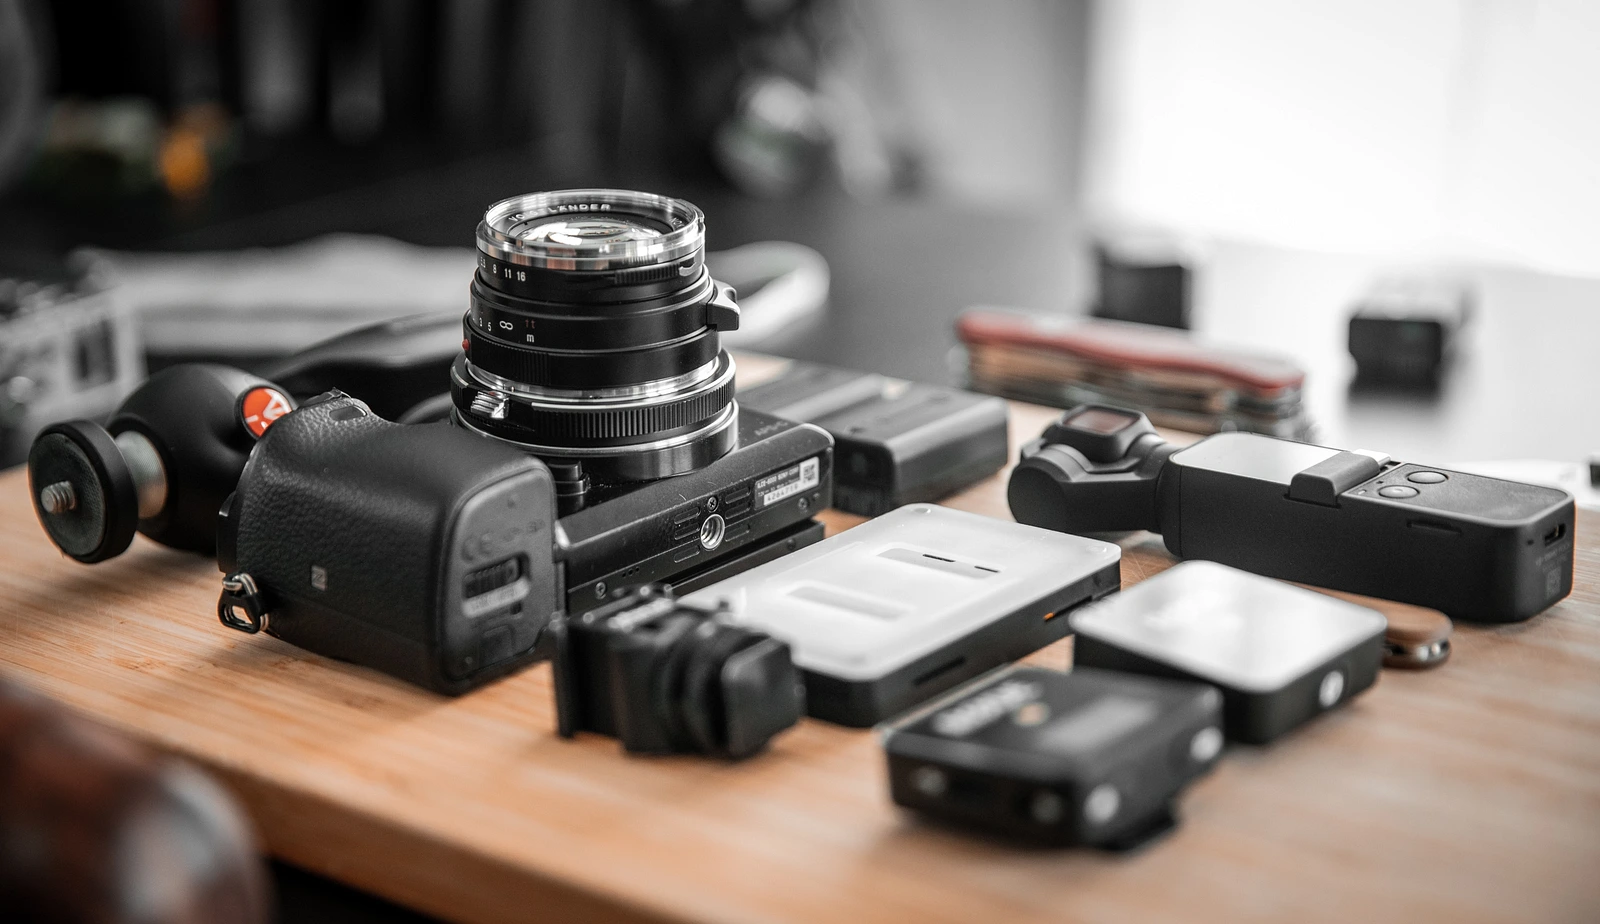 Must-Have Photography Accessories Every Photographer Should Own